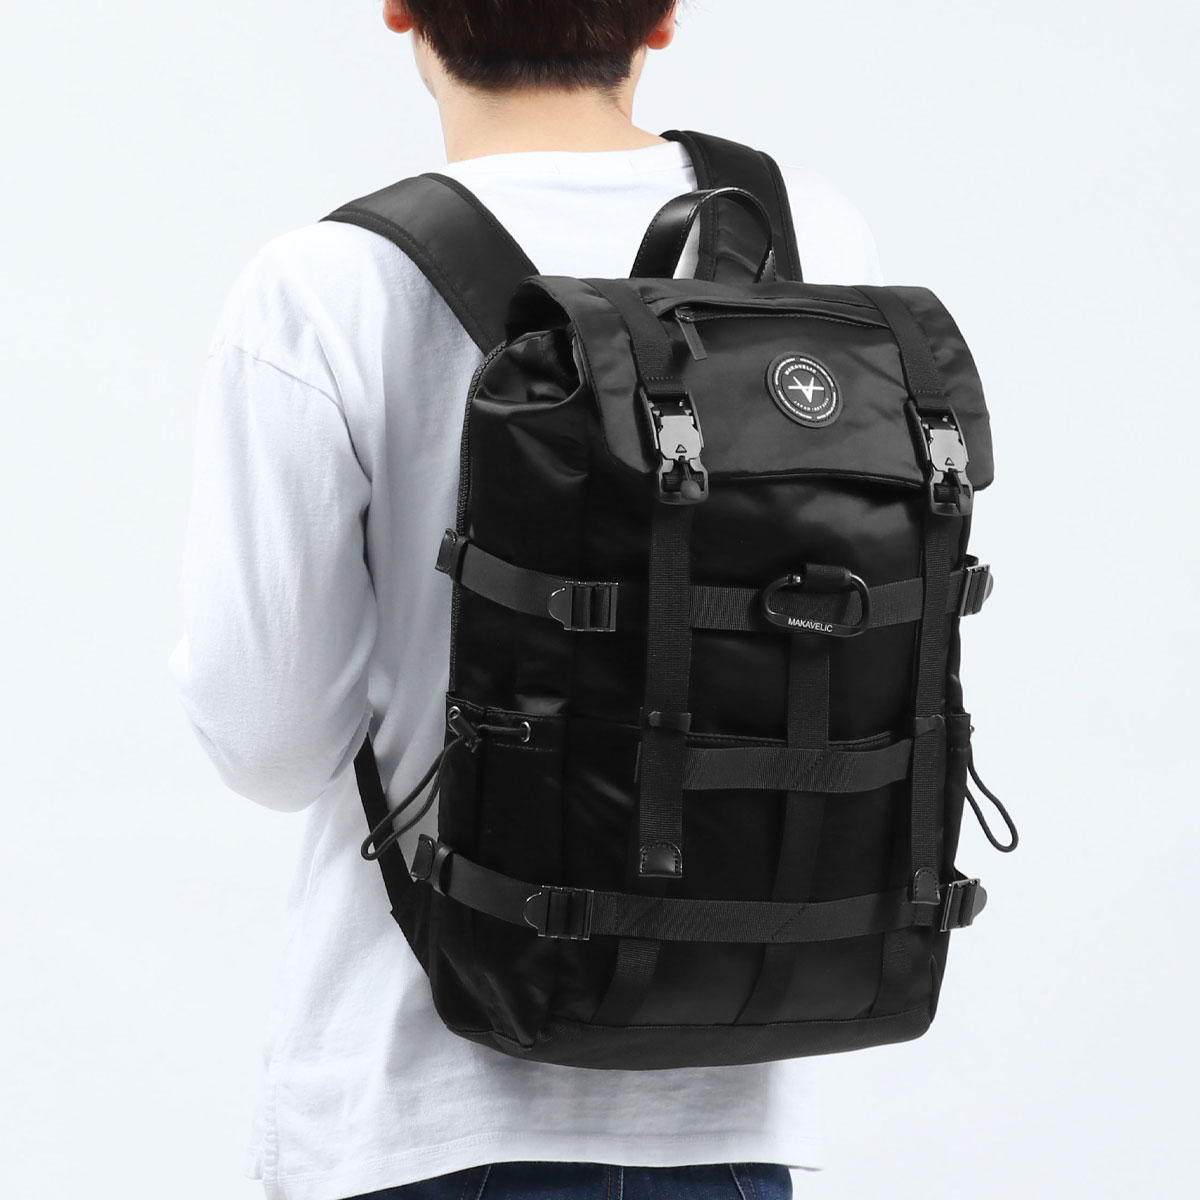 MAKAVELIC マキャベリック X-DESIGN LIMITED MESH WORK BACKPACK 3120 ...